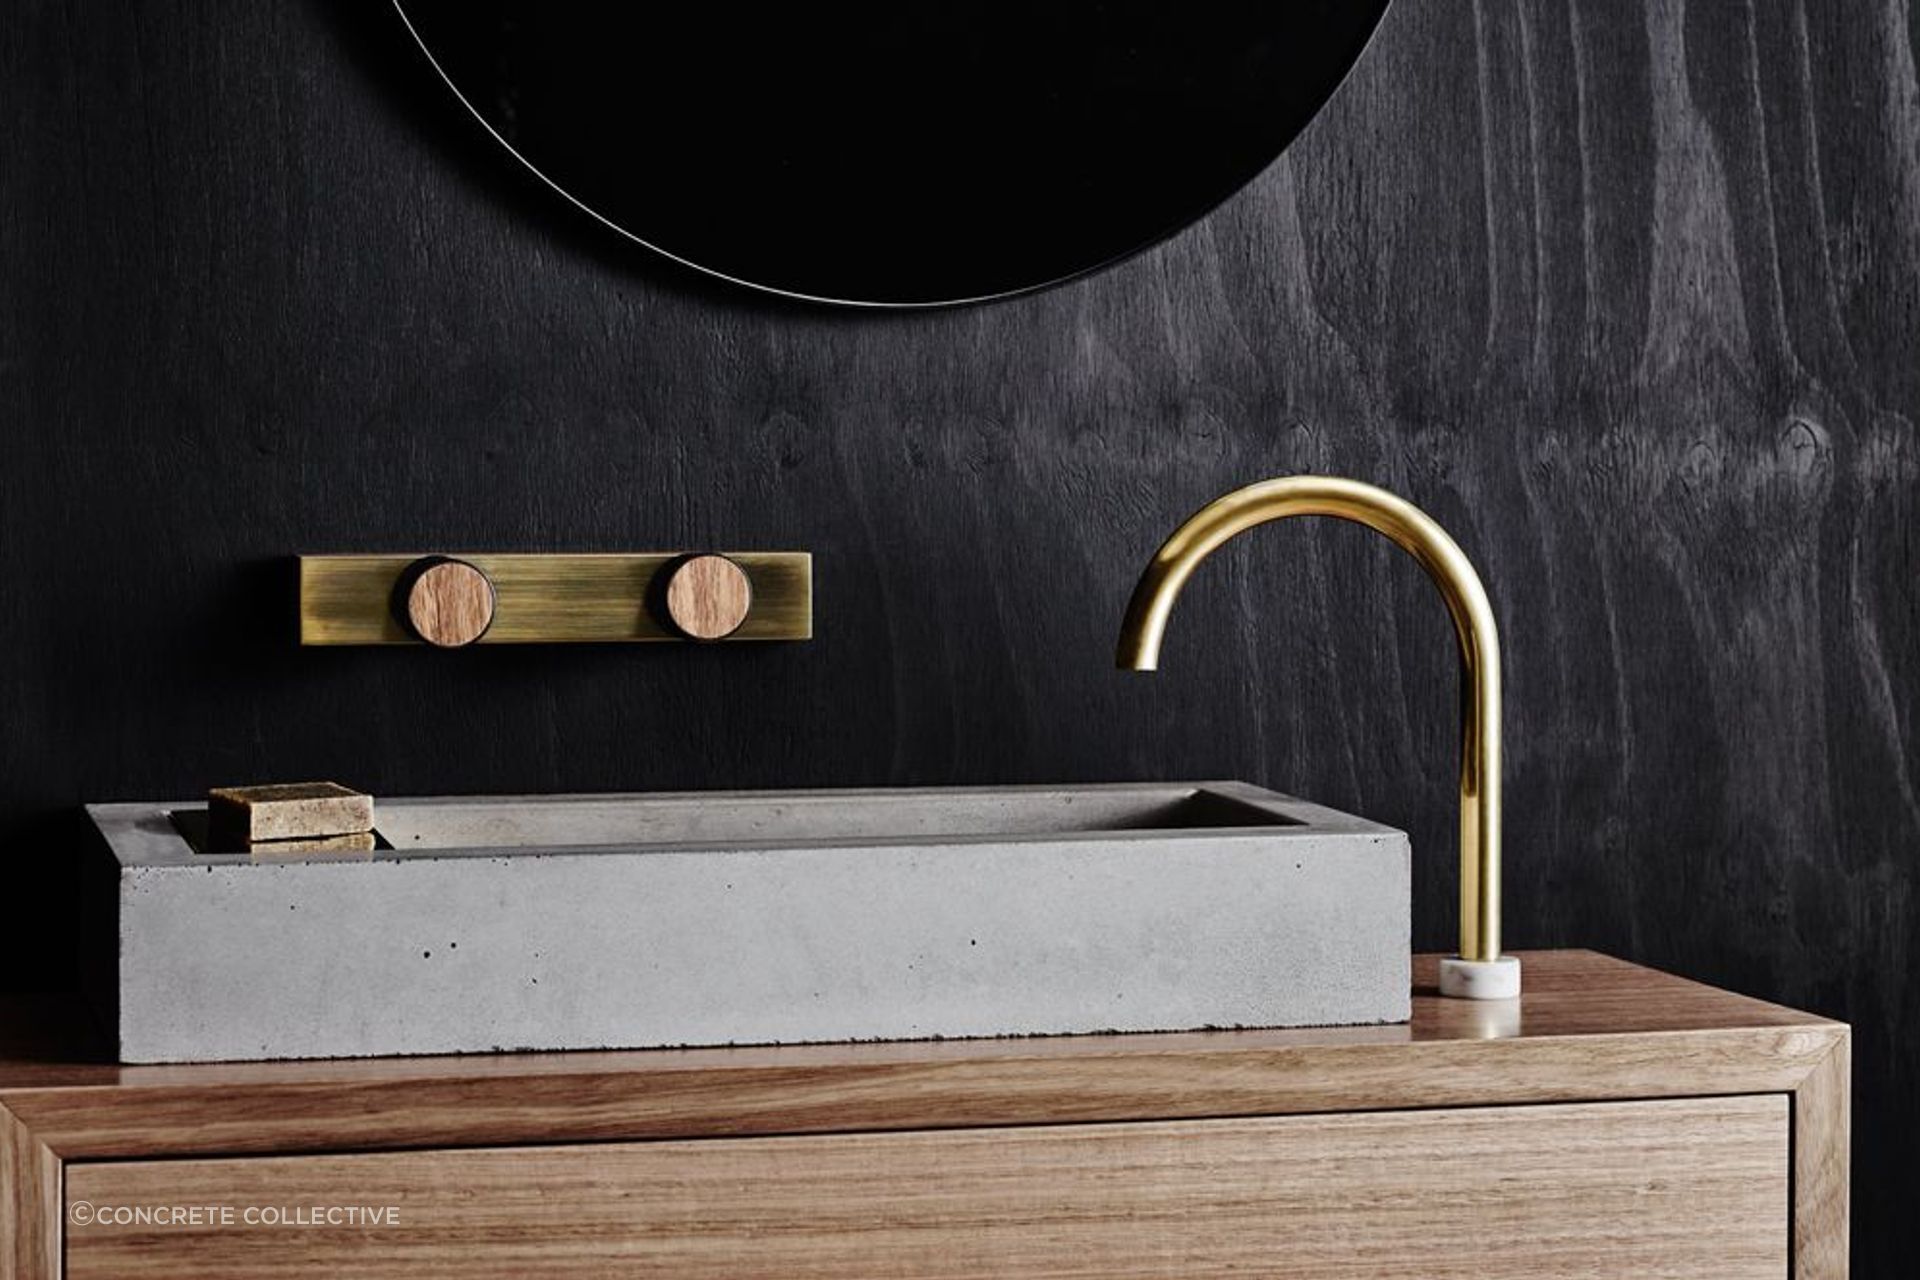  Wood Melbourne Leo Round Brass &amp; Timber Taps - Concrete Collective